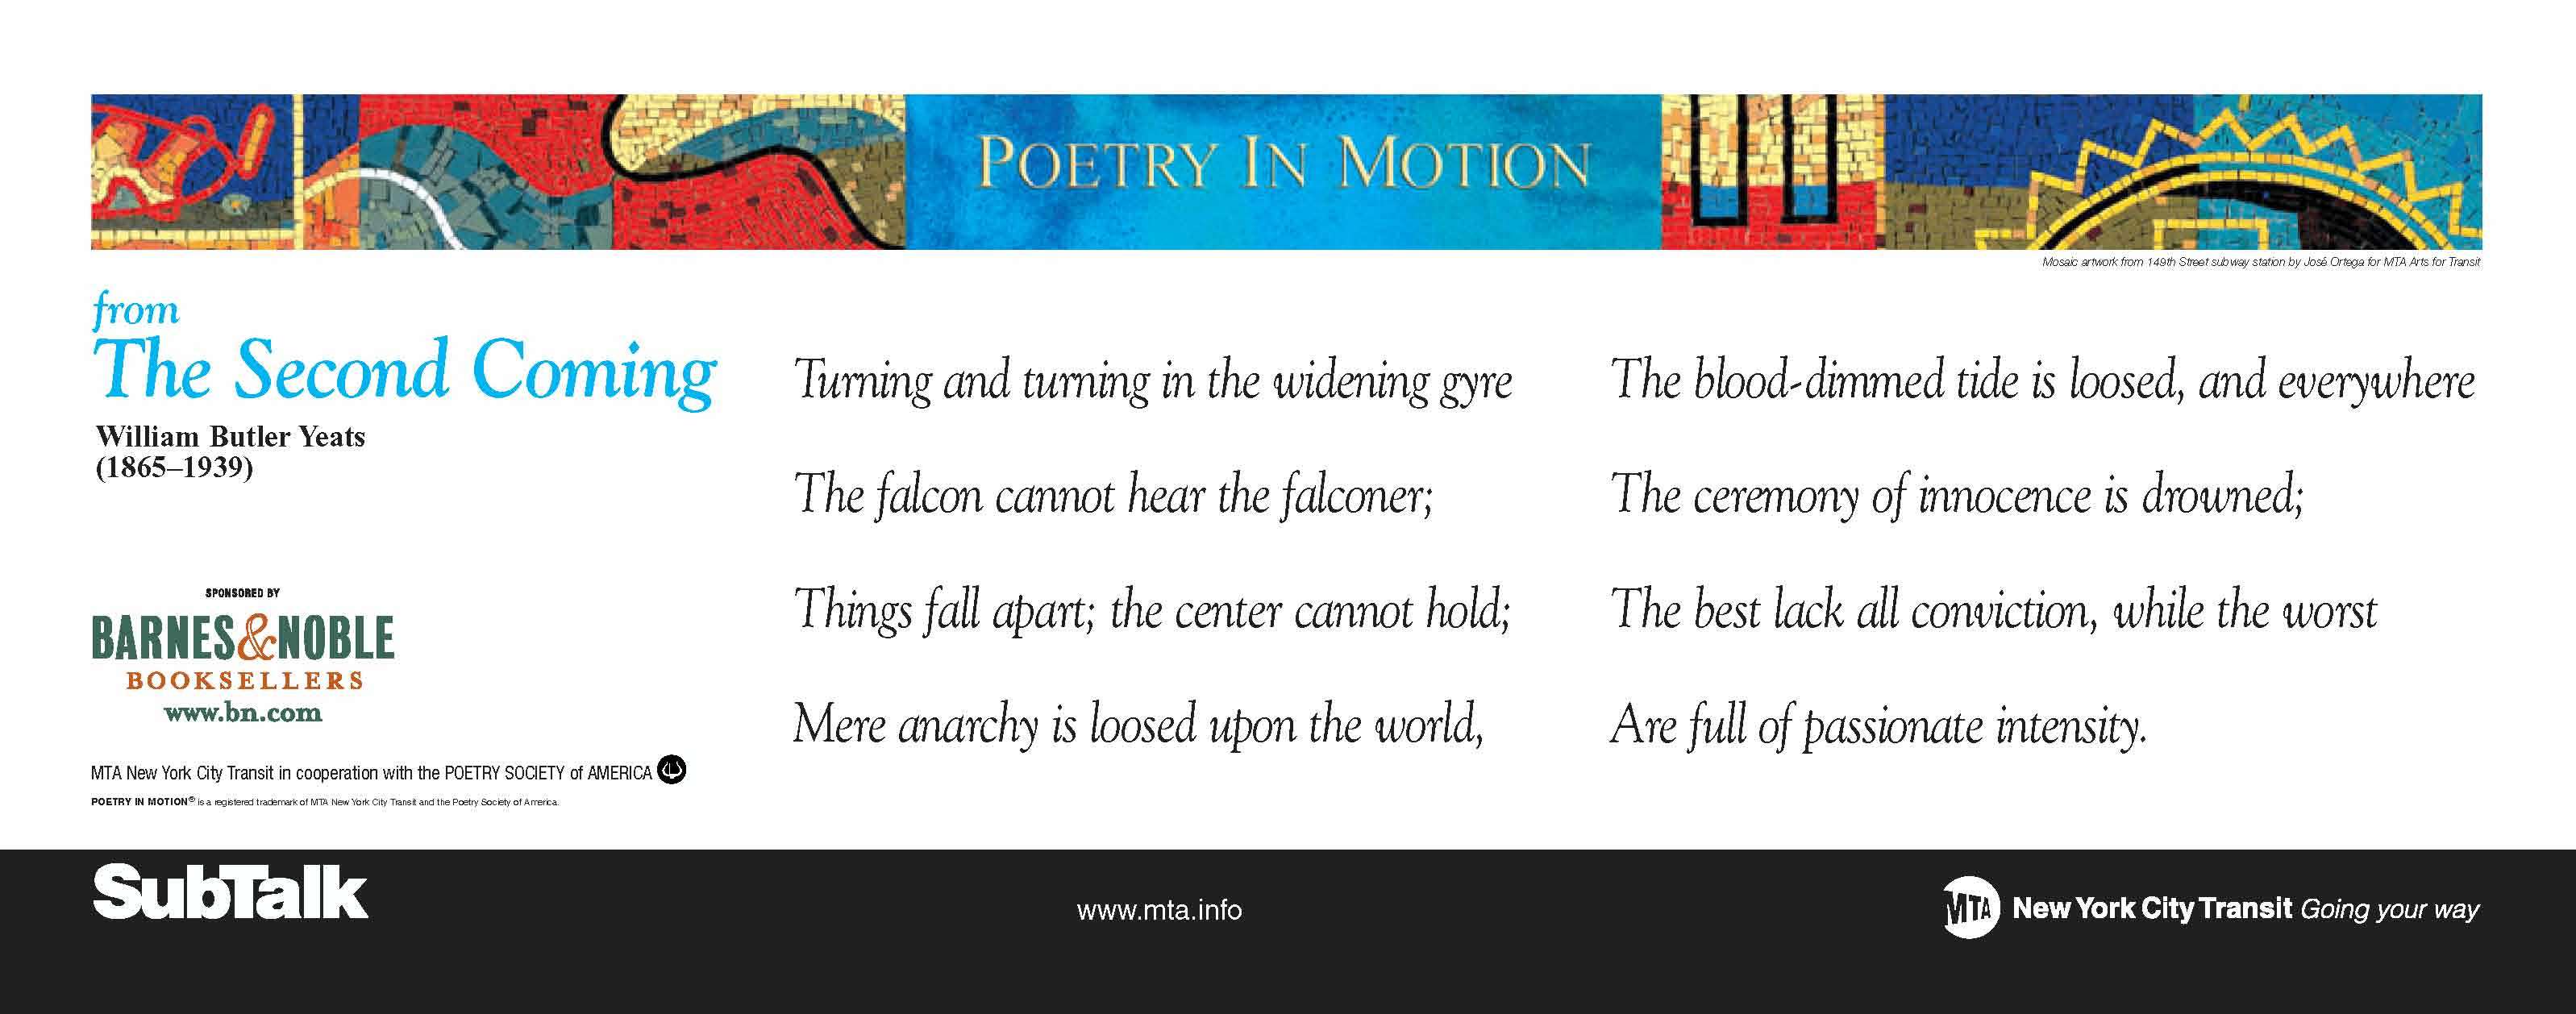 A horizontal poster with a colorful mosaic at the top features an excerpt from the poem, The Second Coming, by W.B. Yeats